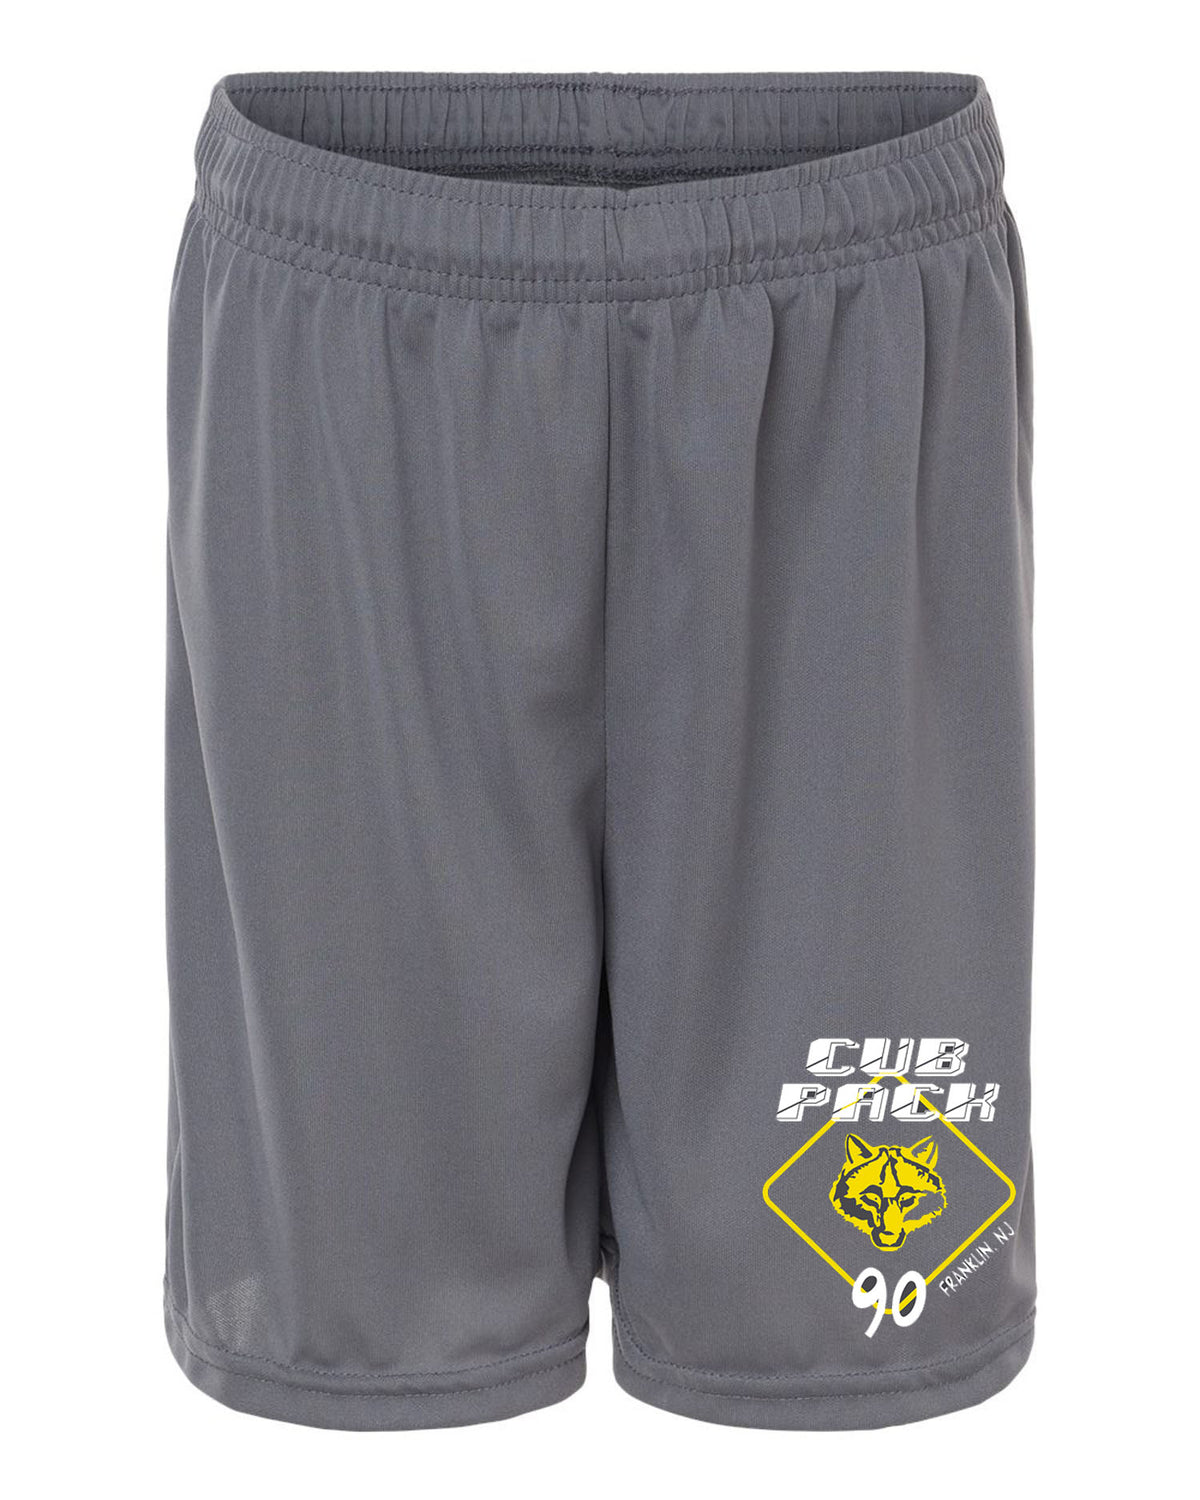 Cub Scout Pack 90 Performance Shorts Design 2